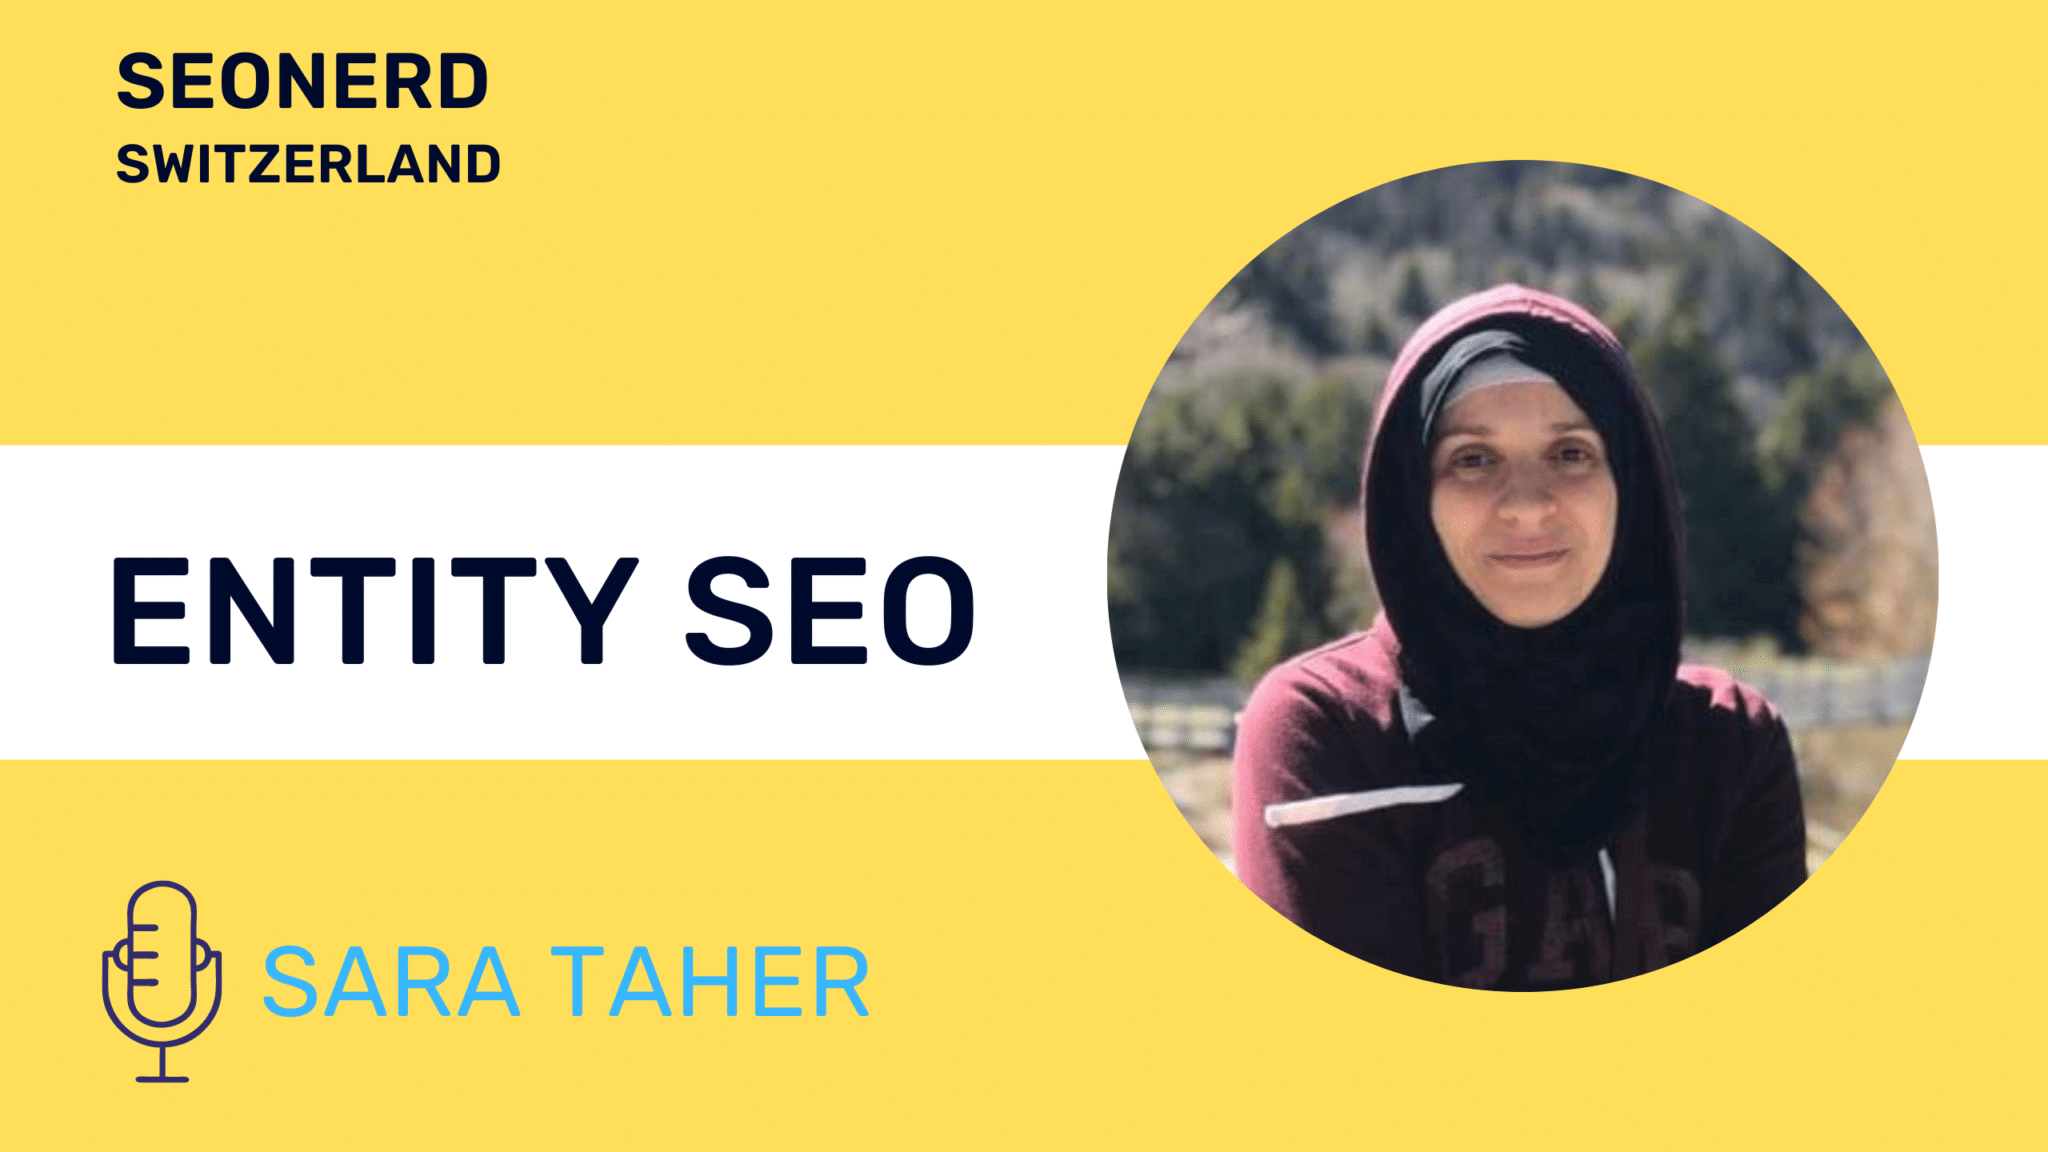 Sara Taher discusses entity SEO at SEOnerdSwitzerland. Watch the recording and read the transcript now.